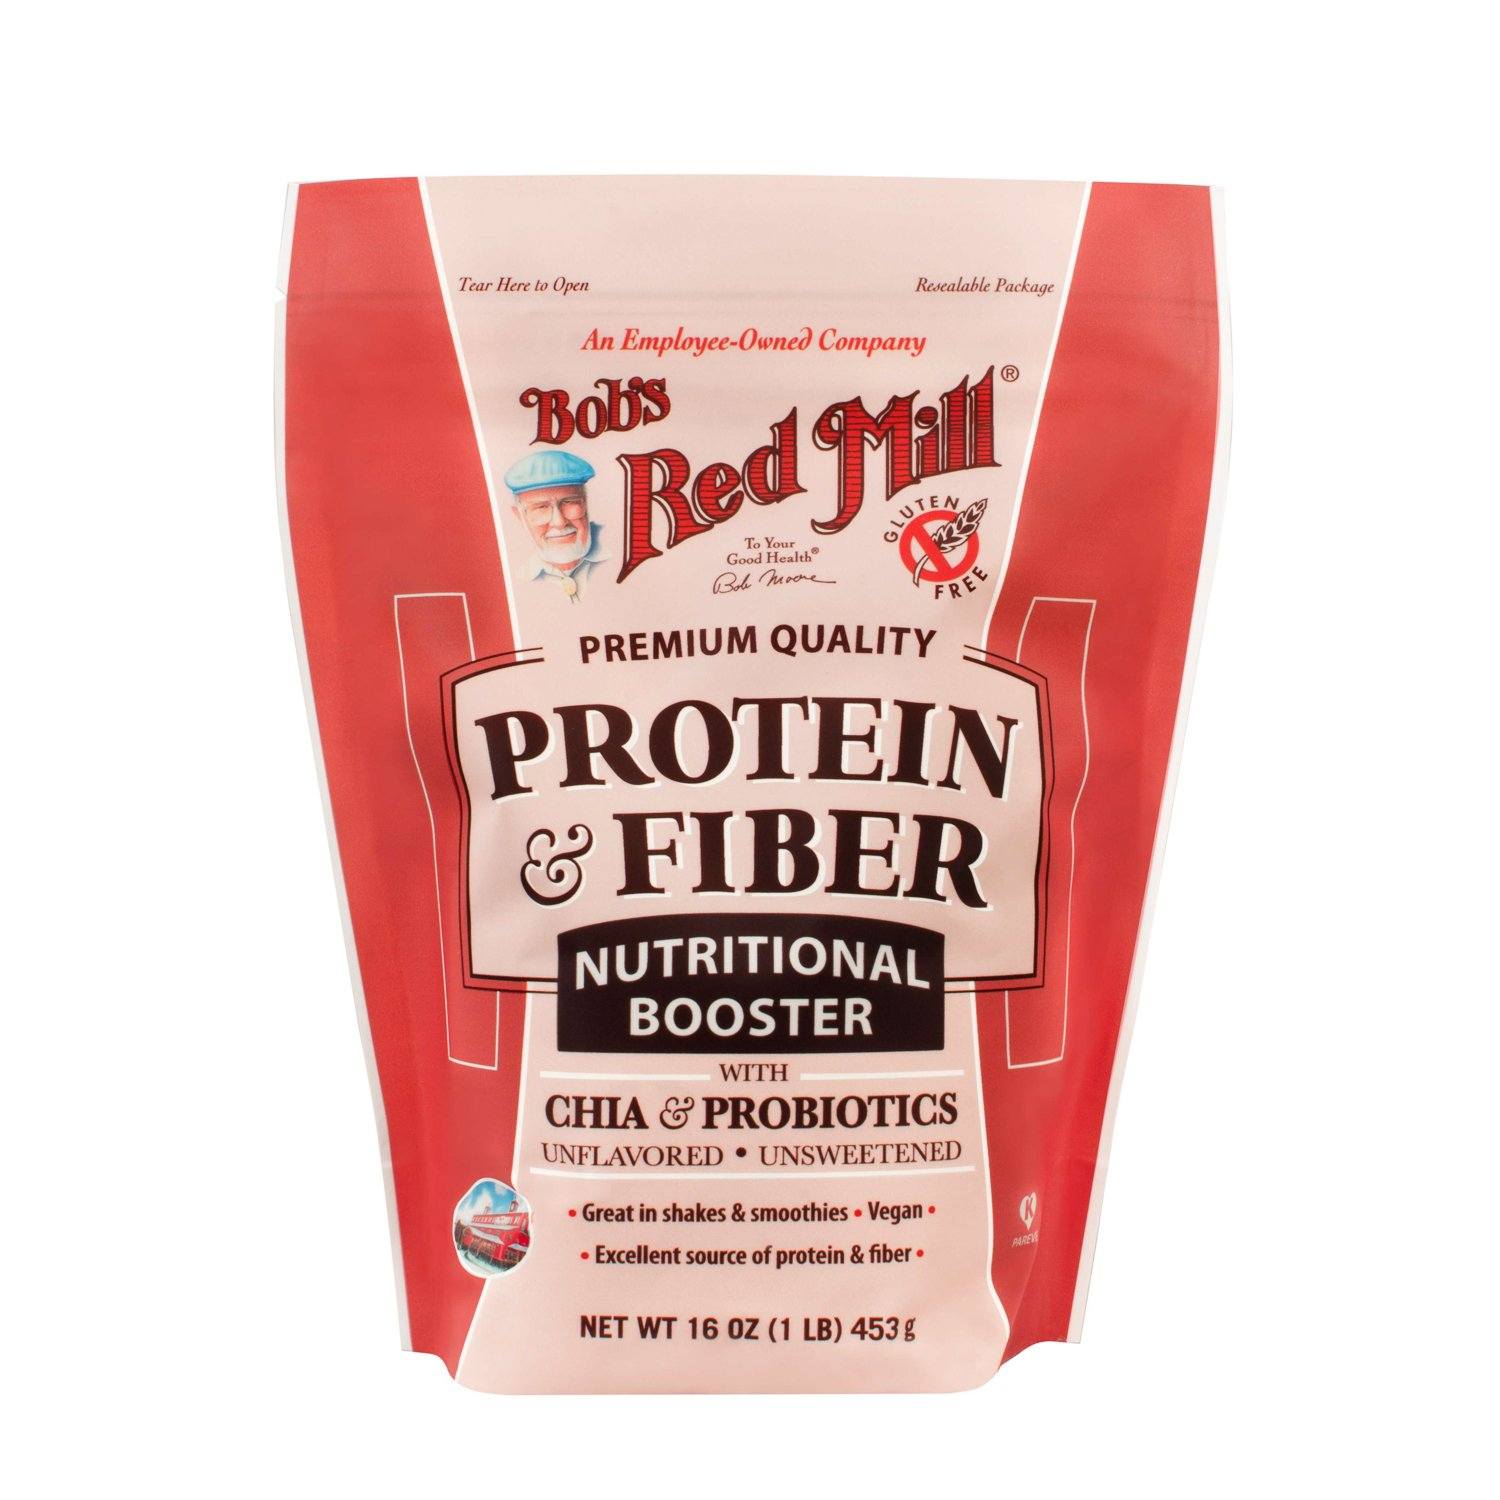 Bob's Red Mill Protein & Fiber Nutritional Booster Bob's Red Mill 16 Ounce 